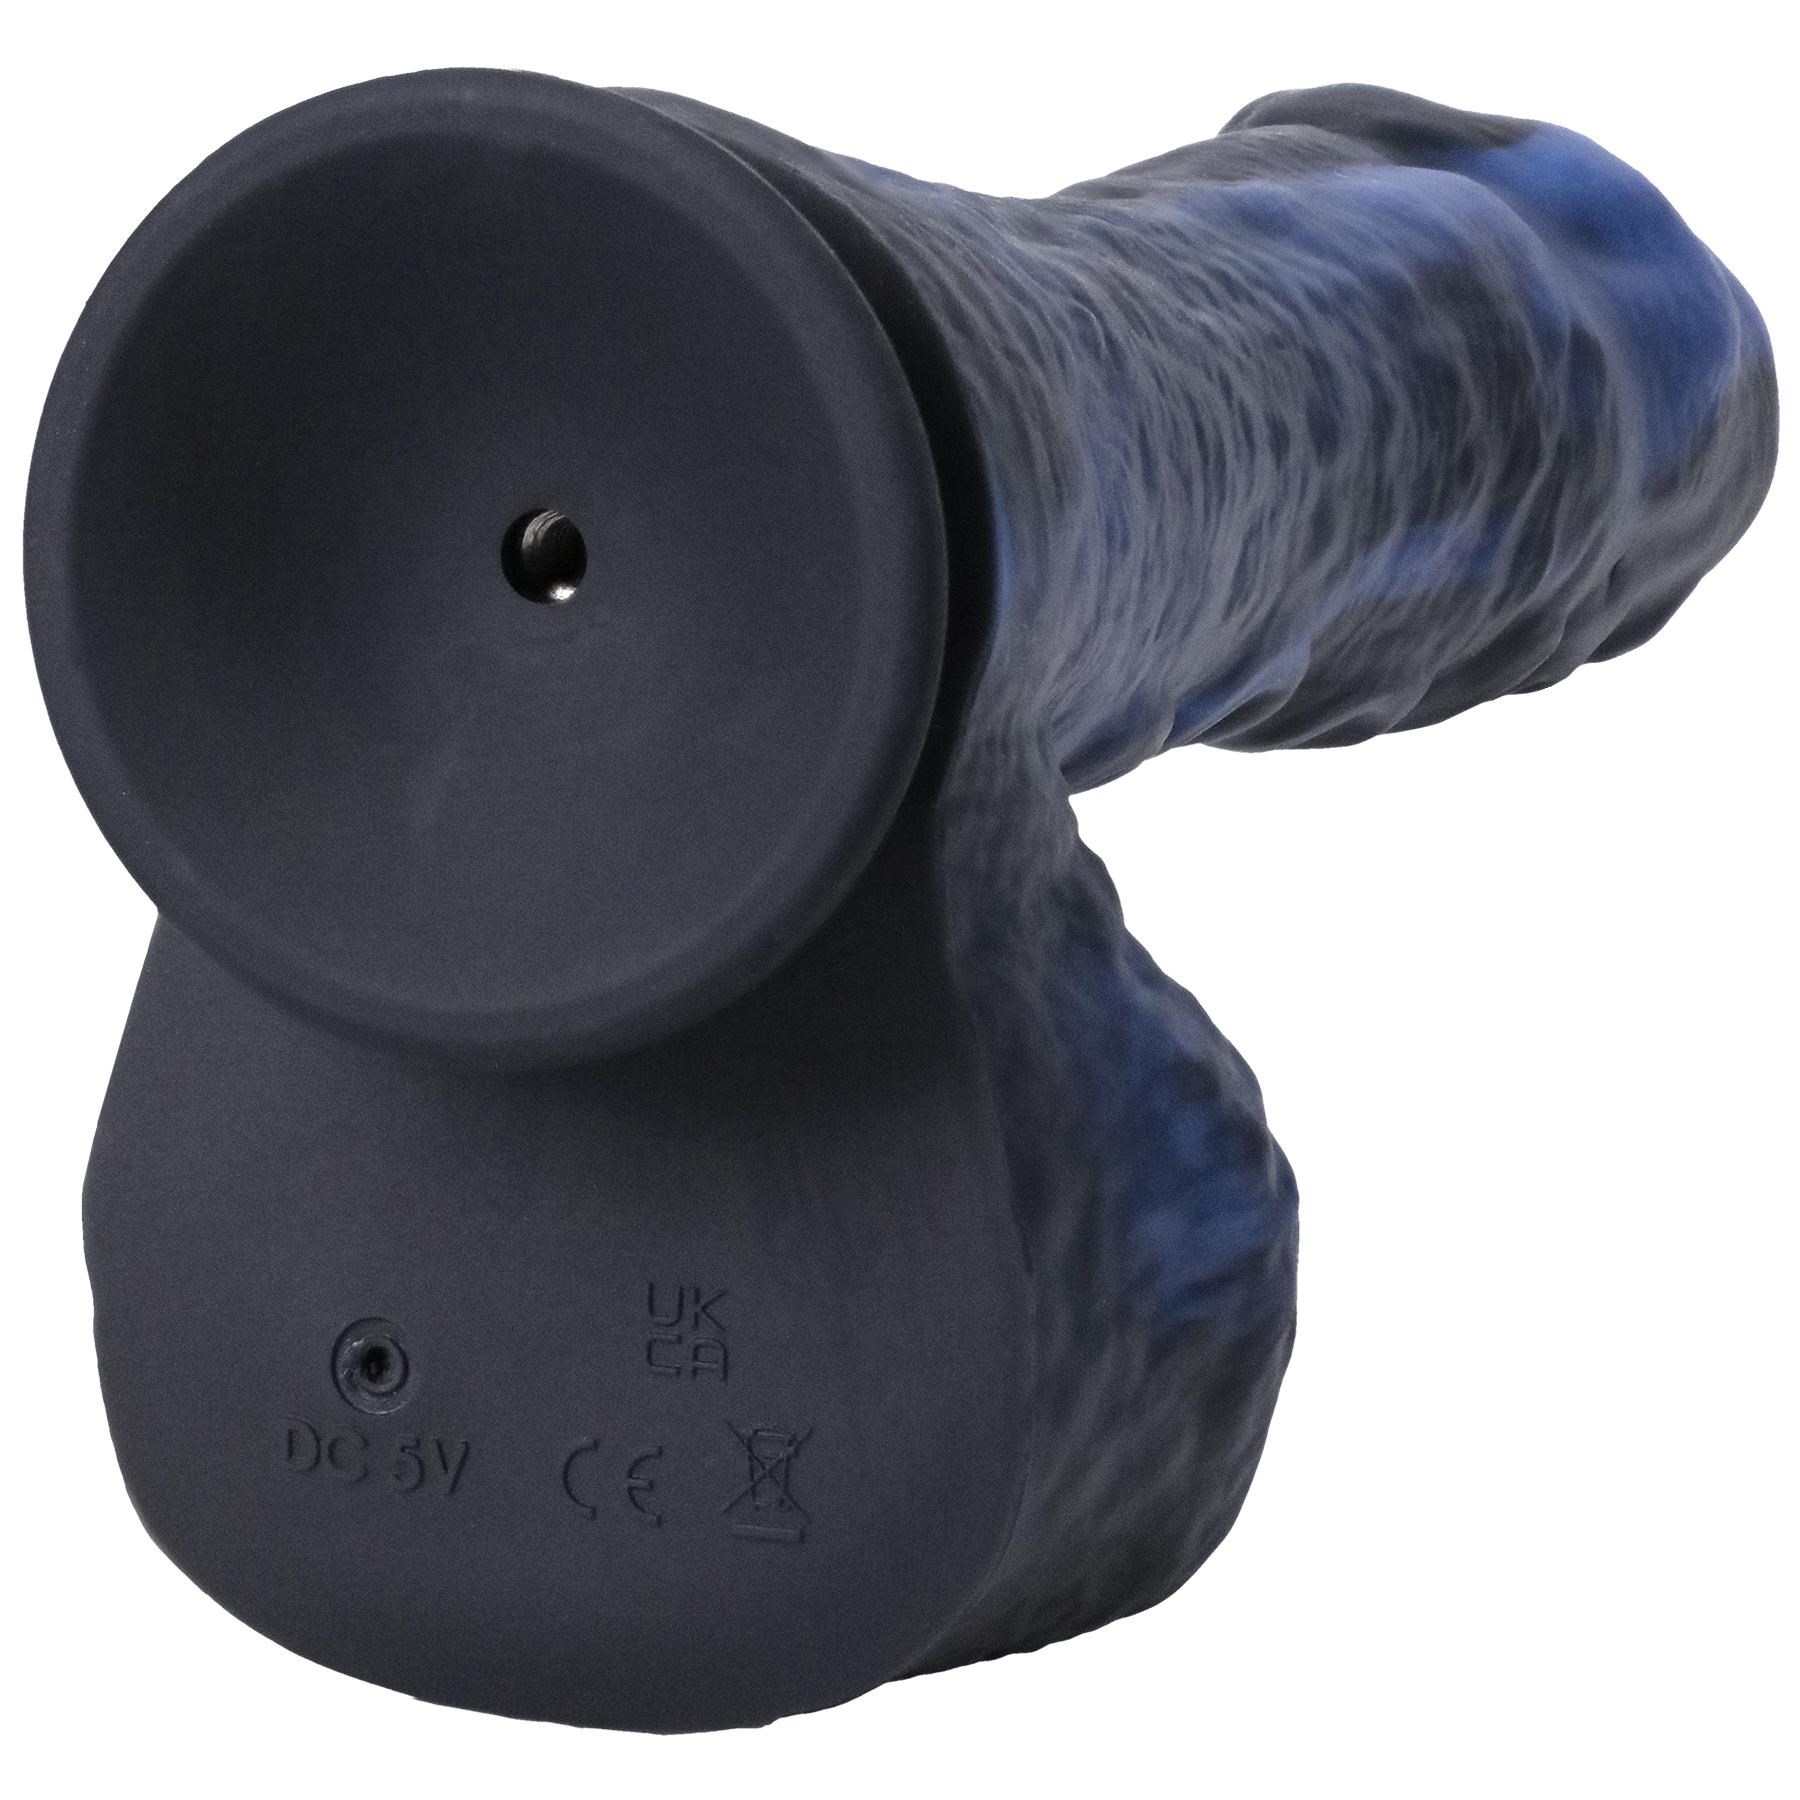 Fort Troff Tendril Thruster Mini F*ck Machine - Dildo - Showing Suction Cup